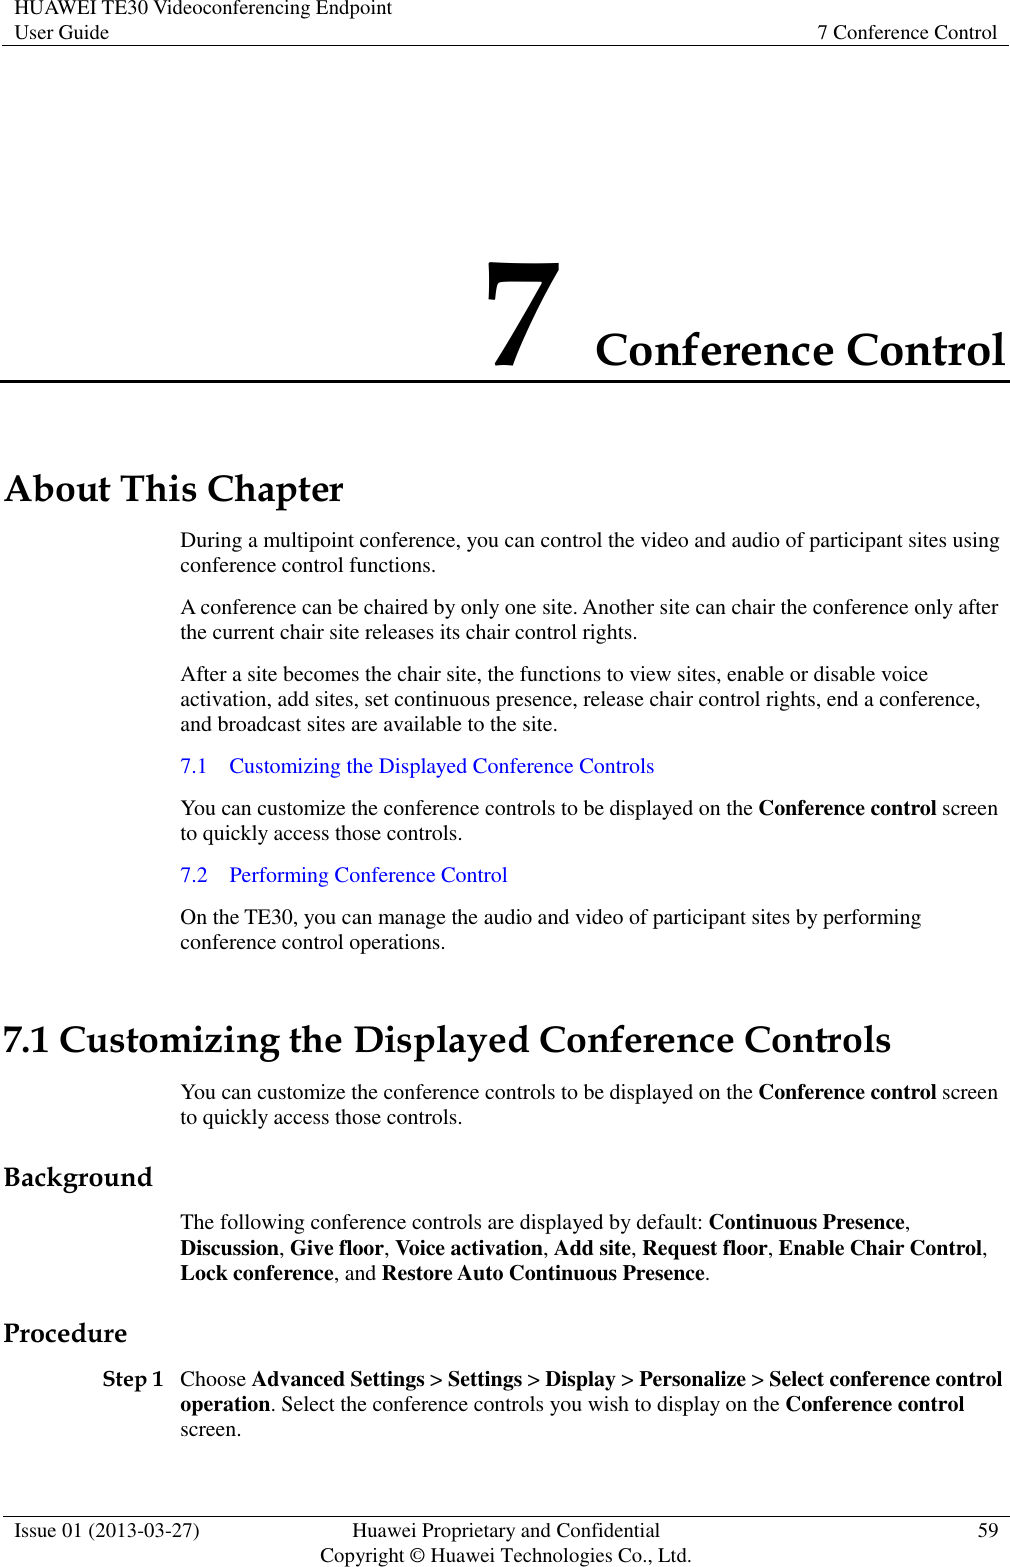 HUAWEI TE30 Videoconferencing Endpoint User Guide 7 Conference Control  Issue 01 (2013-03-27) Huawei Proprietary and Confidential                                     Copyright © Huawei Technologies Co., Ltd. 59  7 Conference Control About This Chapter During a multipoint conference, you can control the video and audio of participant sites using conference control functions. A conference can be chaired by only one site. Another site can chair the conference only after the current chair site releases its chair control rights. After a site becomes the chair site, the functions to view sites, enable or disable voice activation, add sites, set continuous presence, release chair control rights, end a conference, and broadcast sites are available to the site.   7.1    Customizing the Displayed Conference Controls You can customize the conference controls to be displayed on the Conference control screen to quickly access those controls. 7.2    Performing Conference Control On the TE30, you can manage the audio and video of participant sites by performing conference control operations.   7.1 Customizing the Displayed Conference Controls You can customize the conference controls to be displayed on the Conference control screen to quickly access those controls. Background The following conference controls are displayed by default: Continuous Presence, Discussion, Give floor, Voice activation, Add site, Request floor, Enable Chair Control, Lock conference, and Restore Auto Continuous Presence. Procedure Step 1 Choose Advanced Settings &gt; Settings &gt; Display &gt; Personalize &gt; Select conference control operation. Select the conference controls you wish to display on the Conference control screen. 